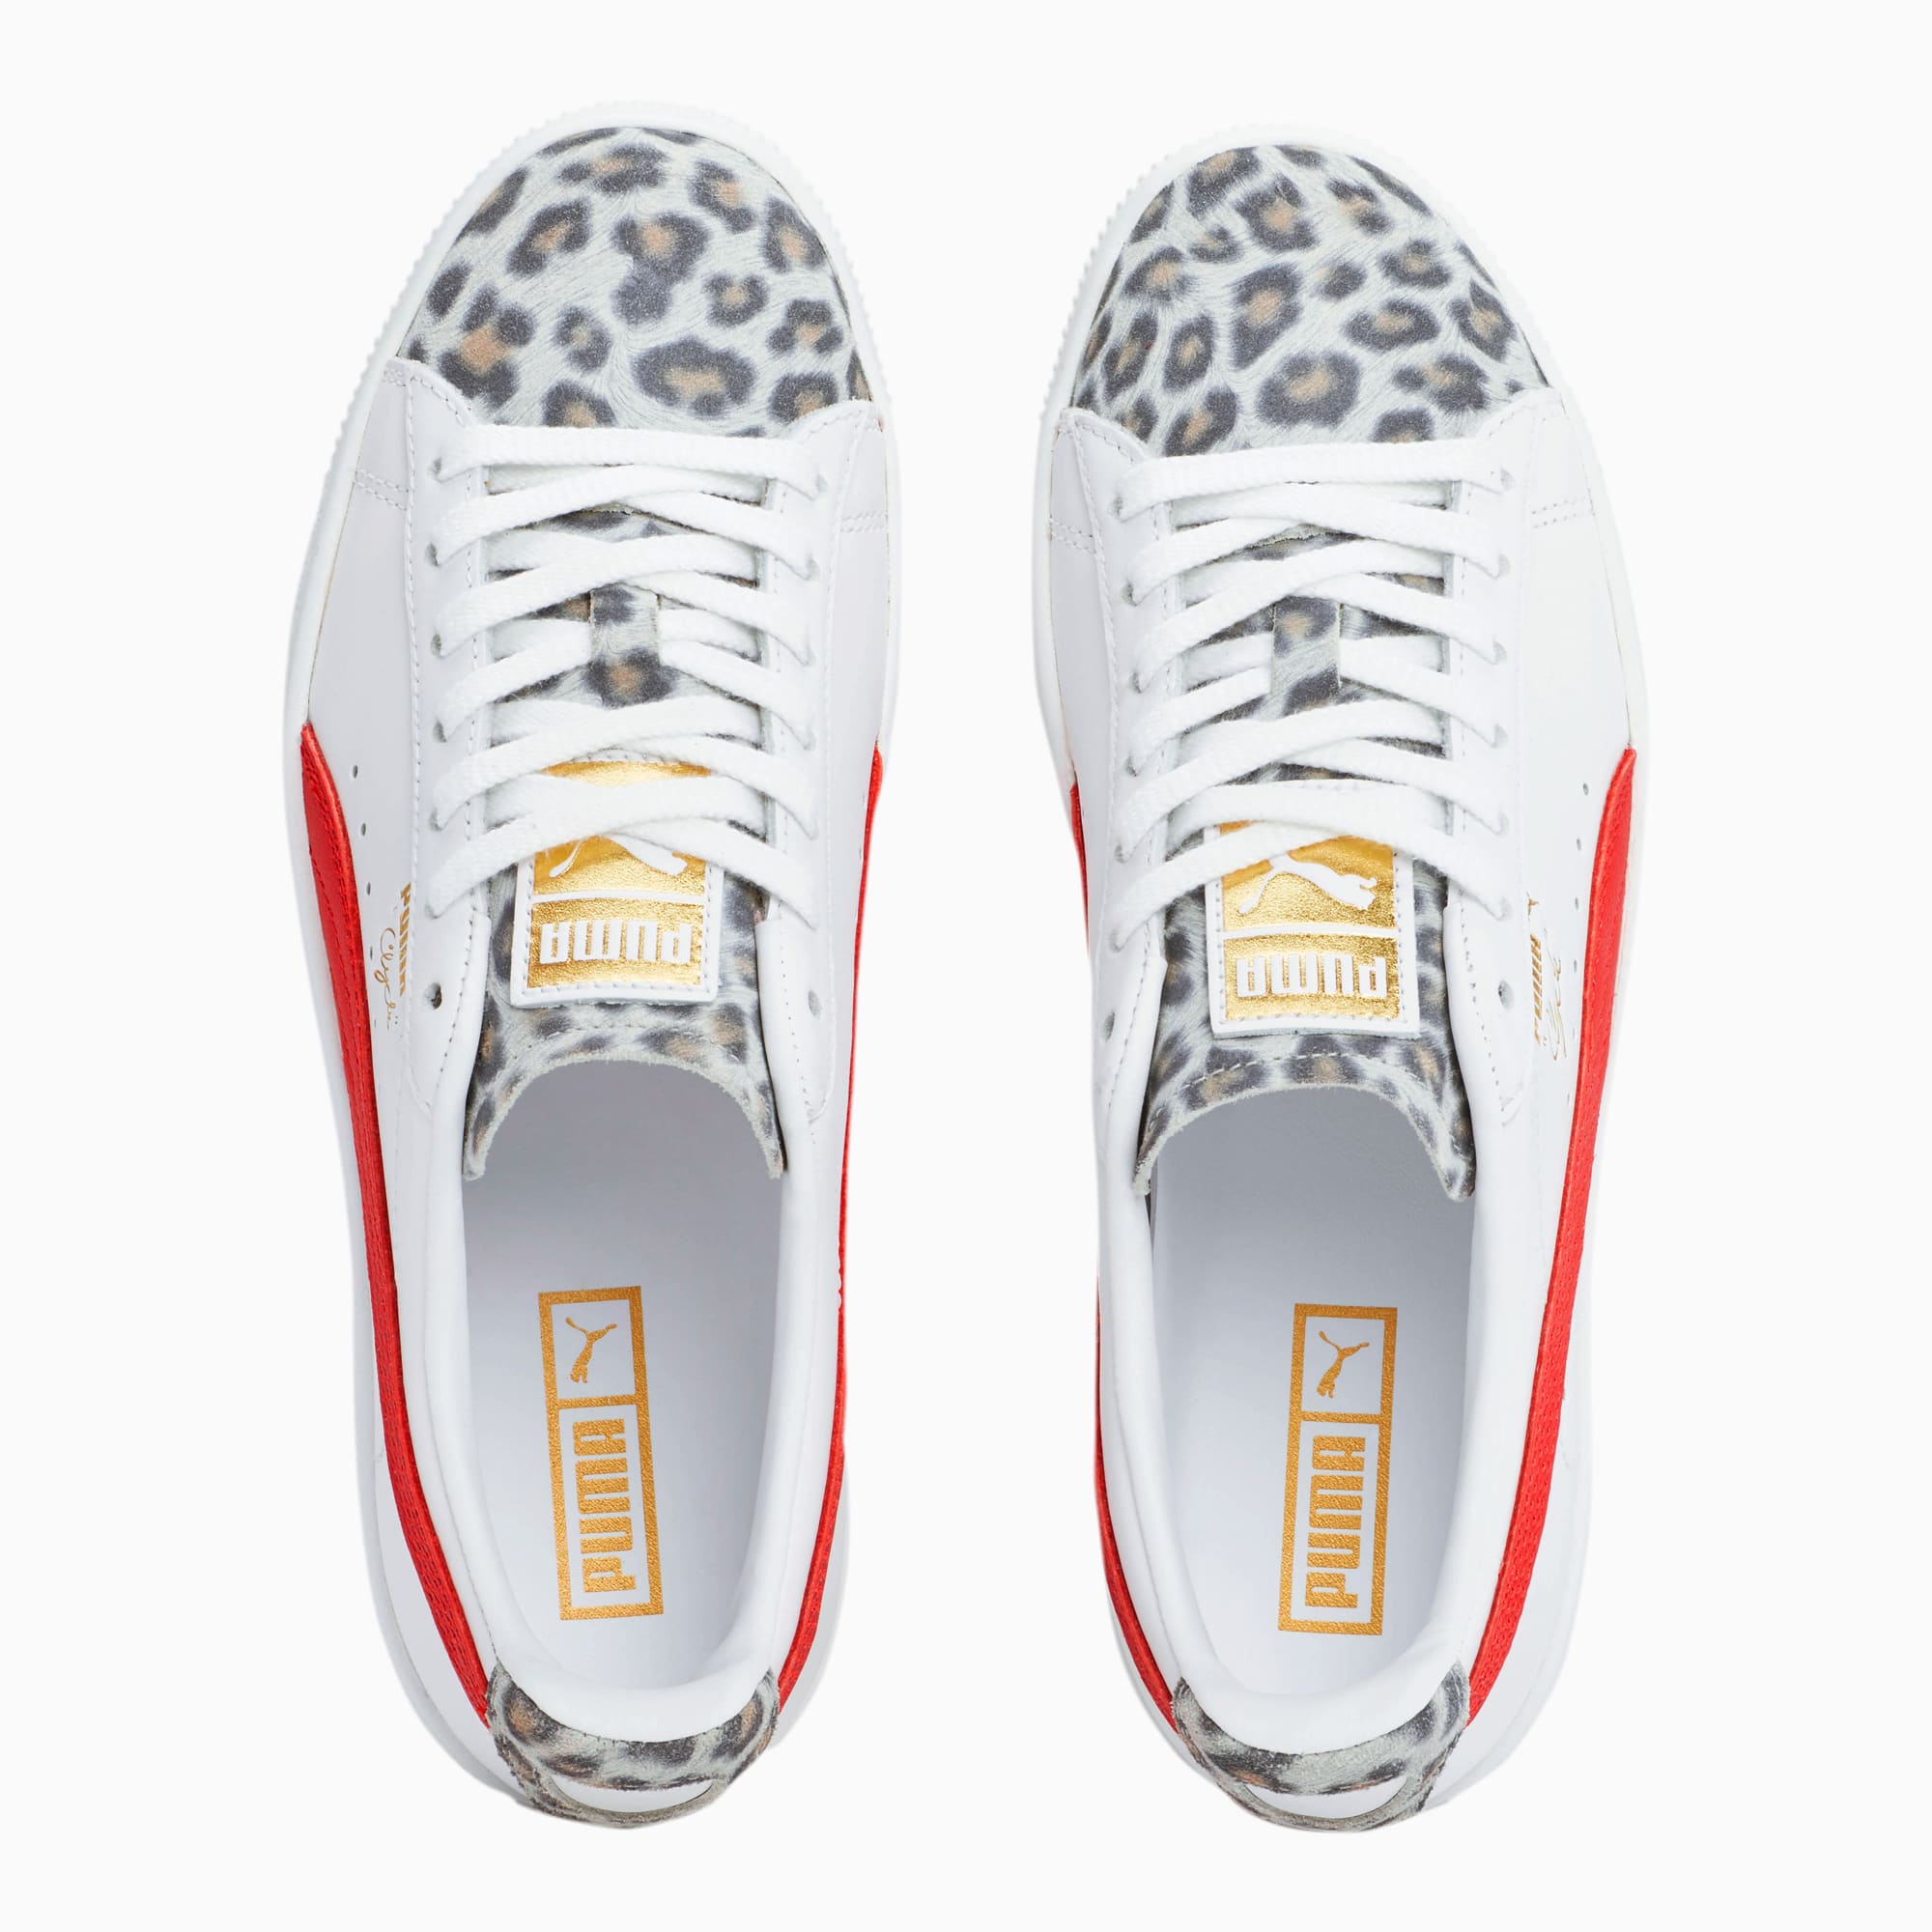 sneakers with leopard accent